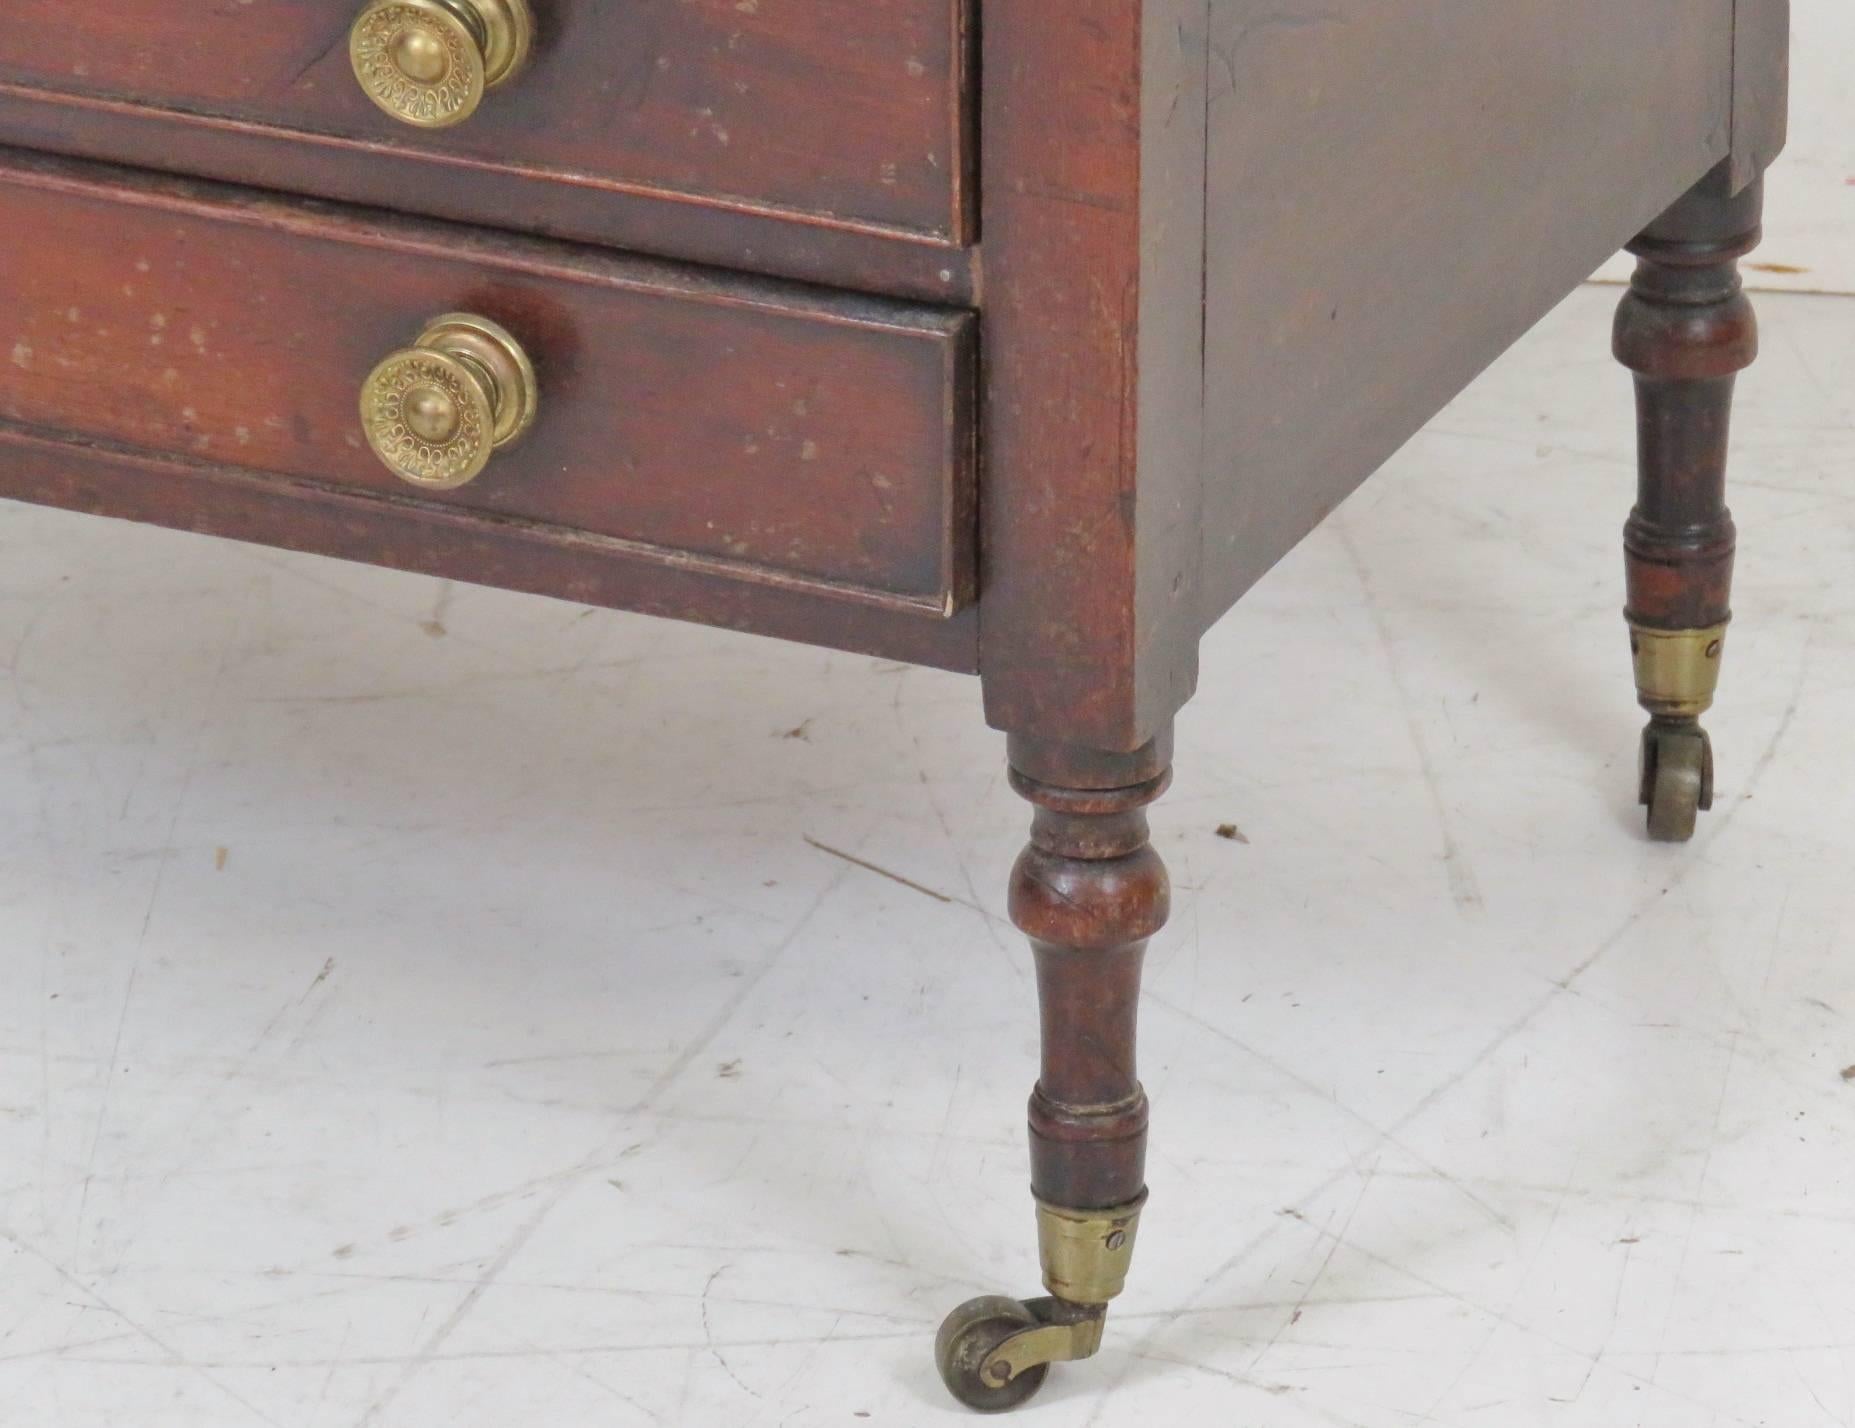 Mahogany with slots for magazines and newspapers and drawers for storage. Brass hardware and rolling feet.